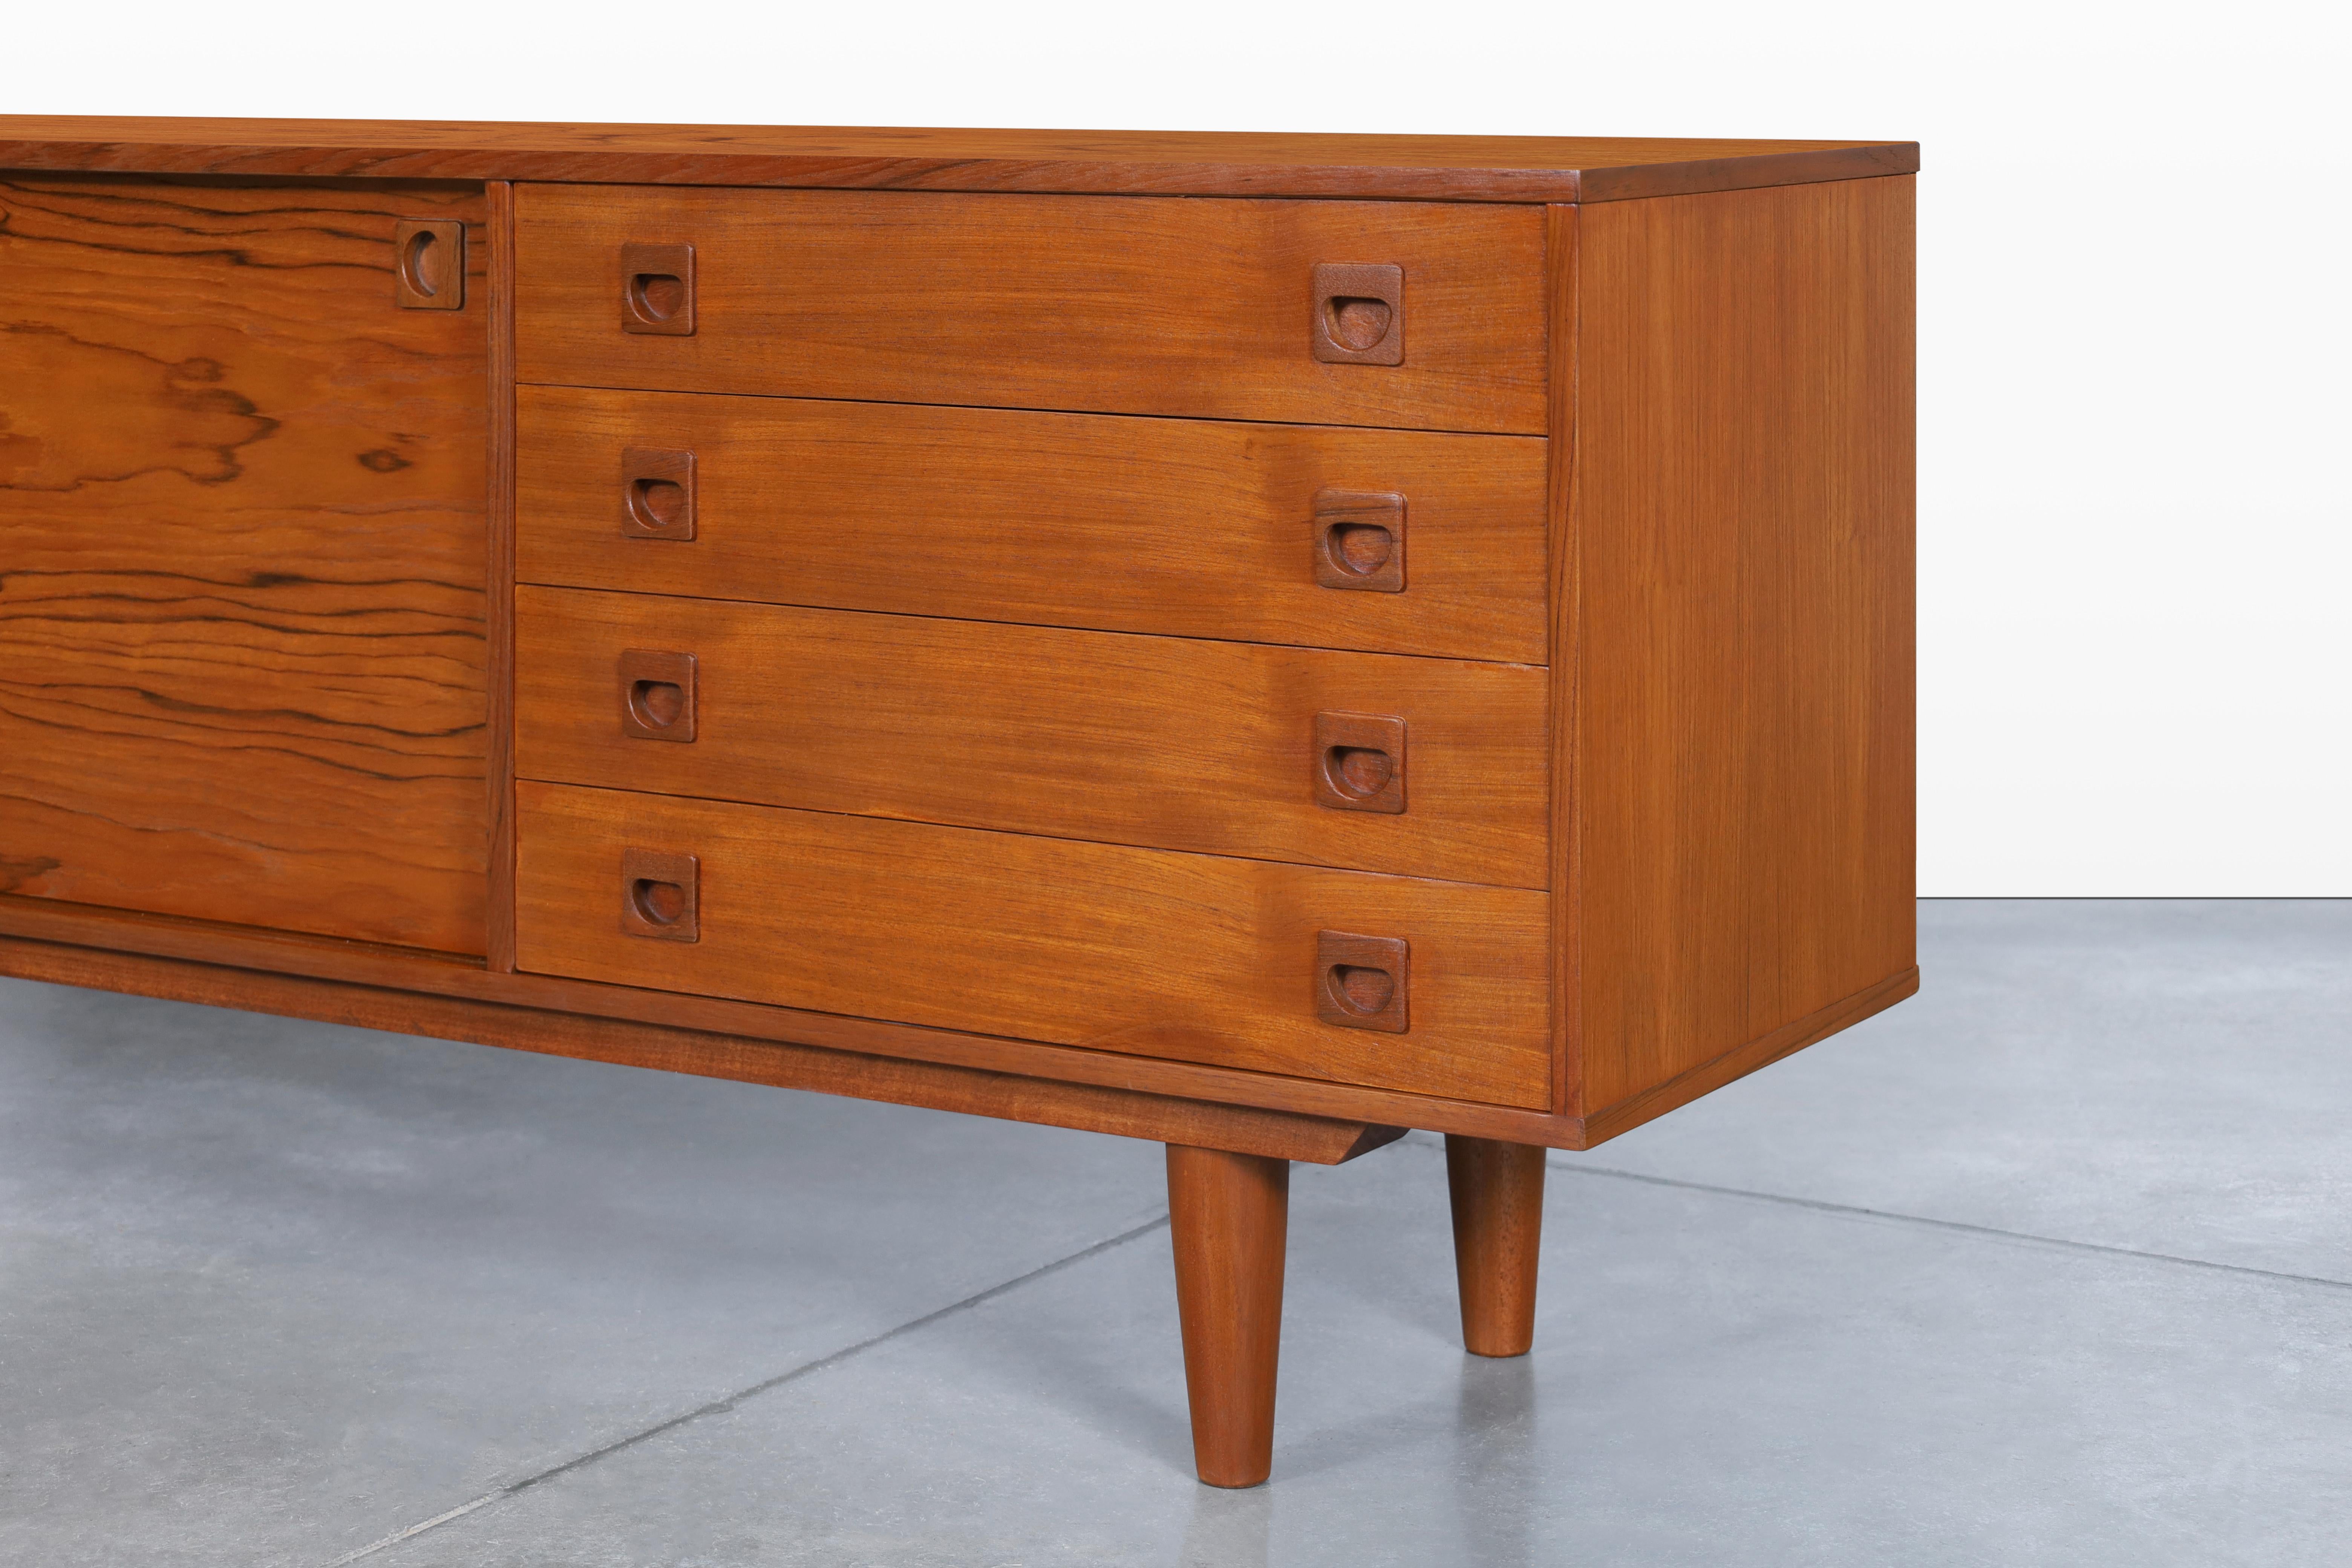 Danish Modern Teak Credenza In Excellent Condition For Sale In North Hollywood, CA